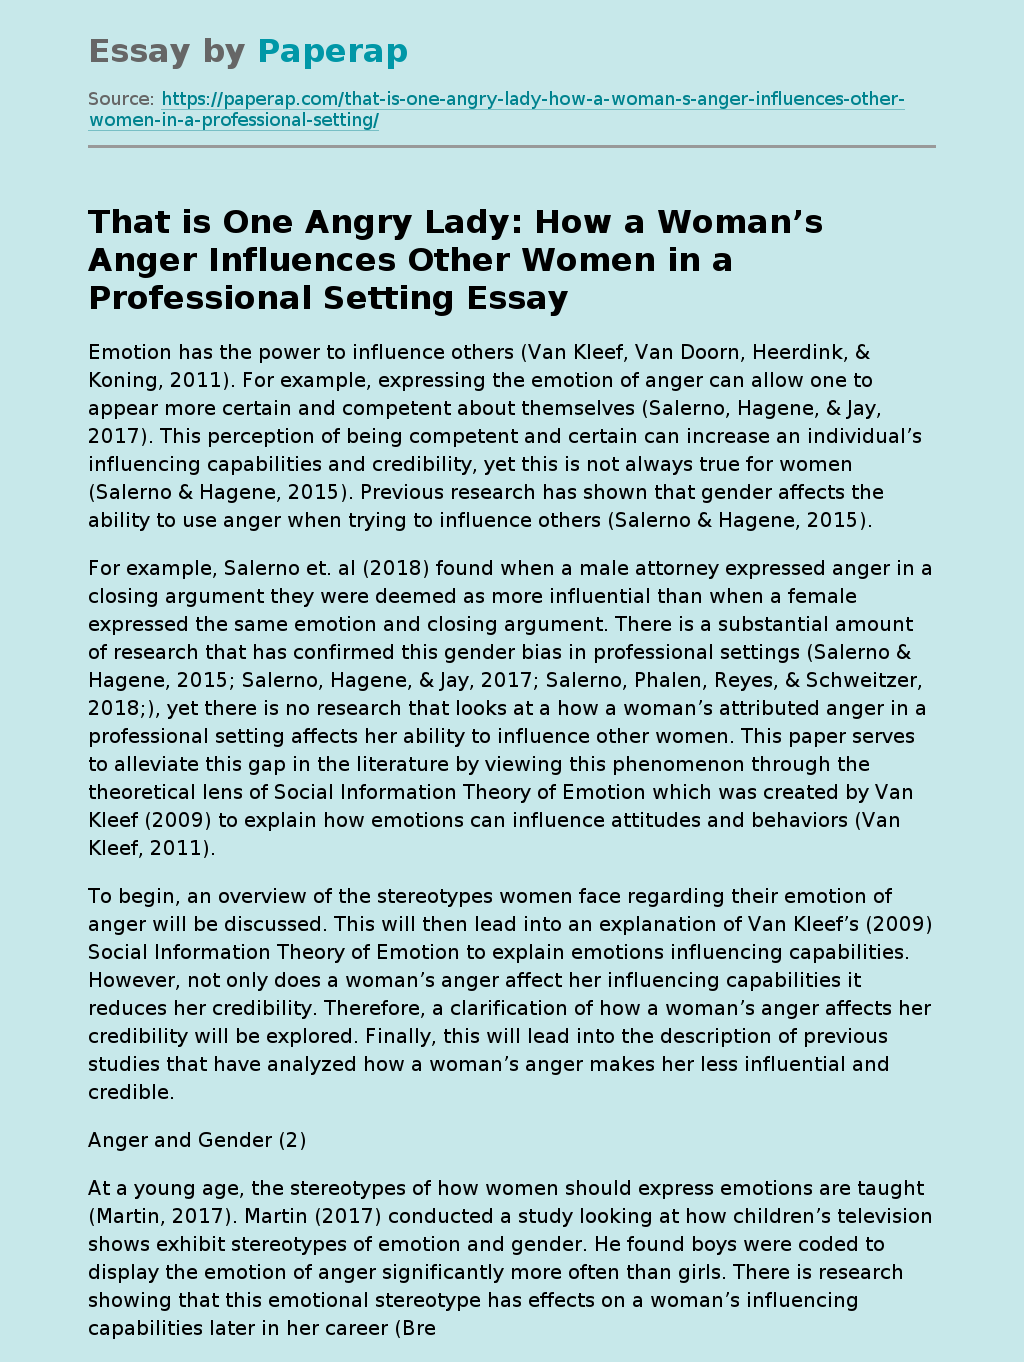 That is One Angry Lady: How a Woman’s Anger Influences Other Women in a Professional Setting